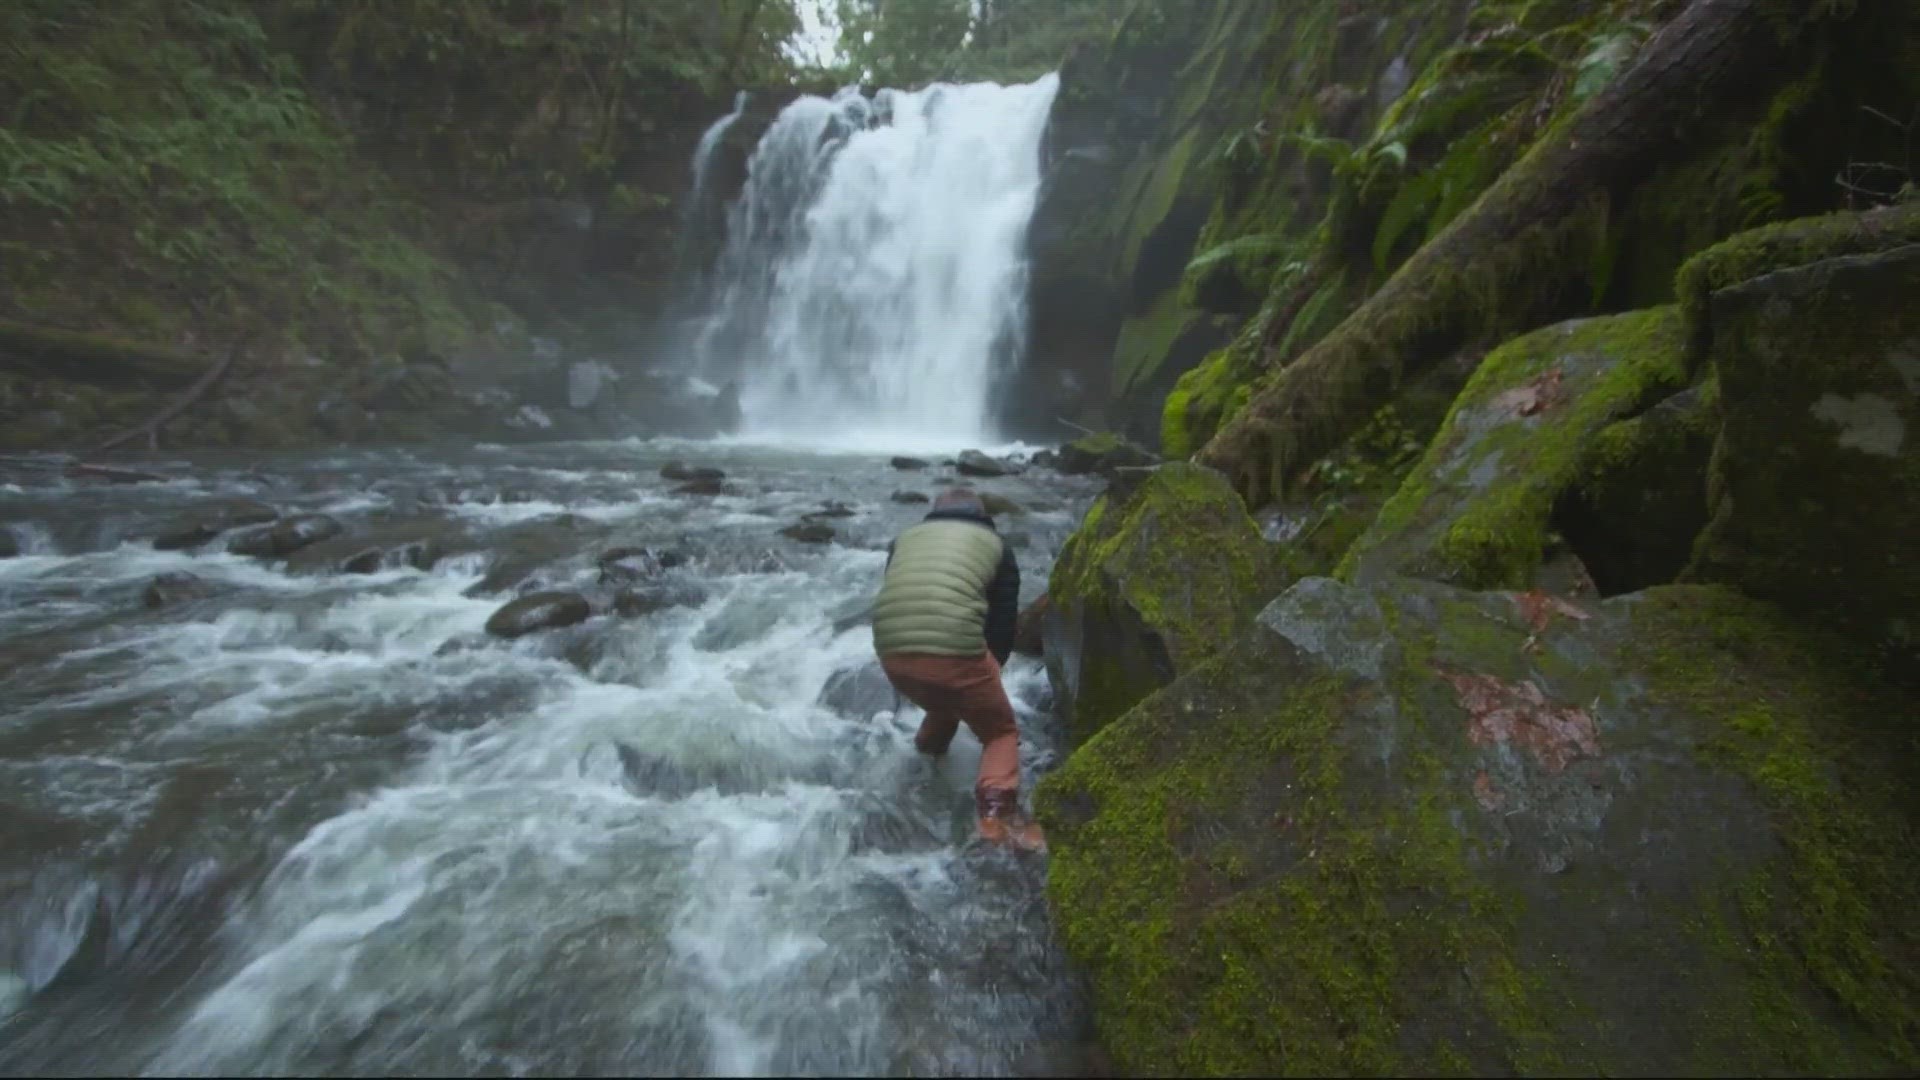 KGW's Grant McOmie joins photographers Lijah and Gabby Hanley on a trek off the beaten path to try to capture the full majesty of Oregon's landscapes.